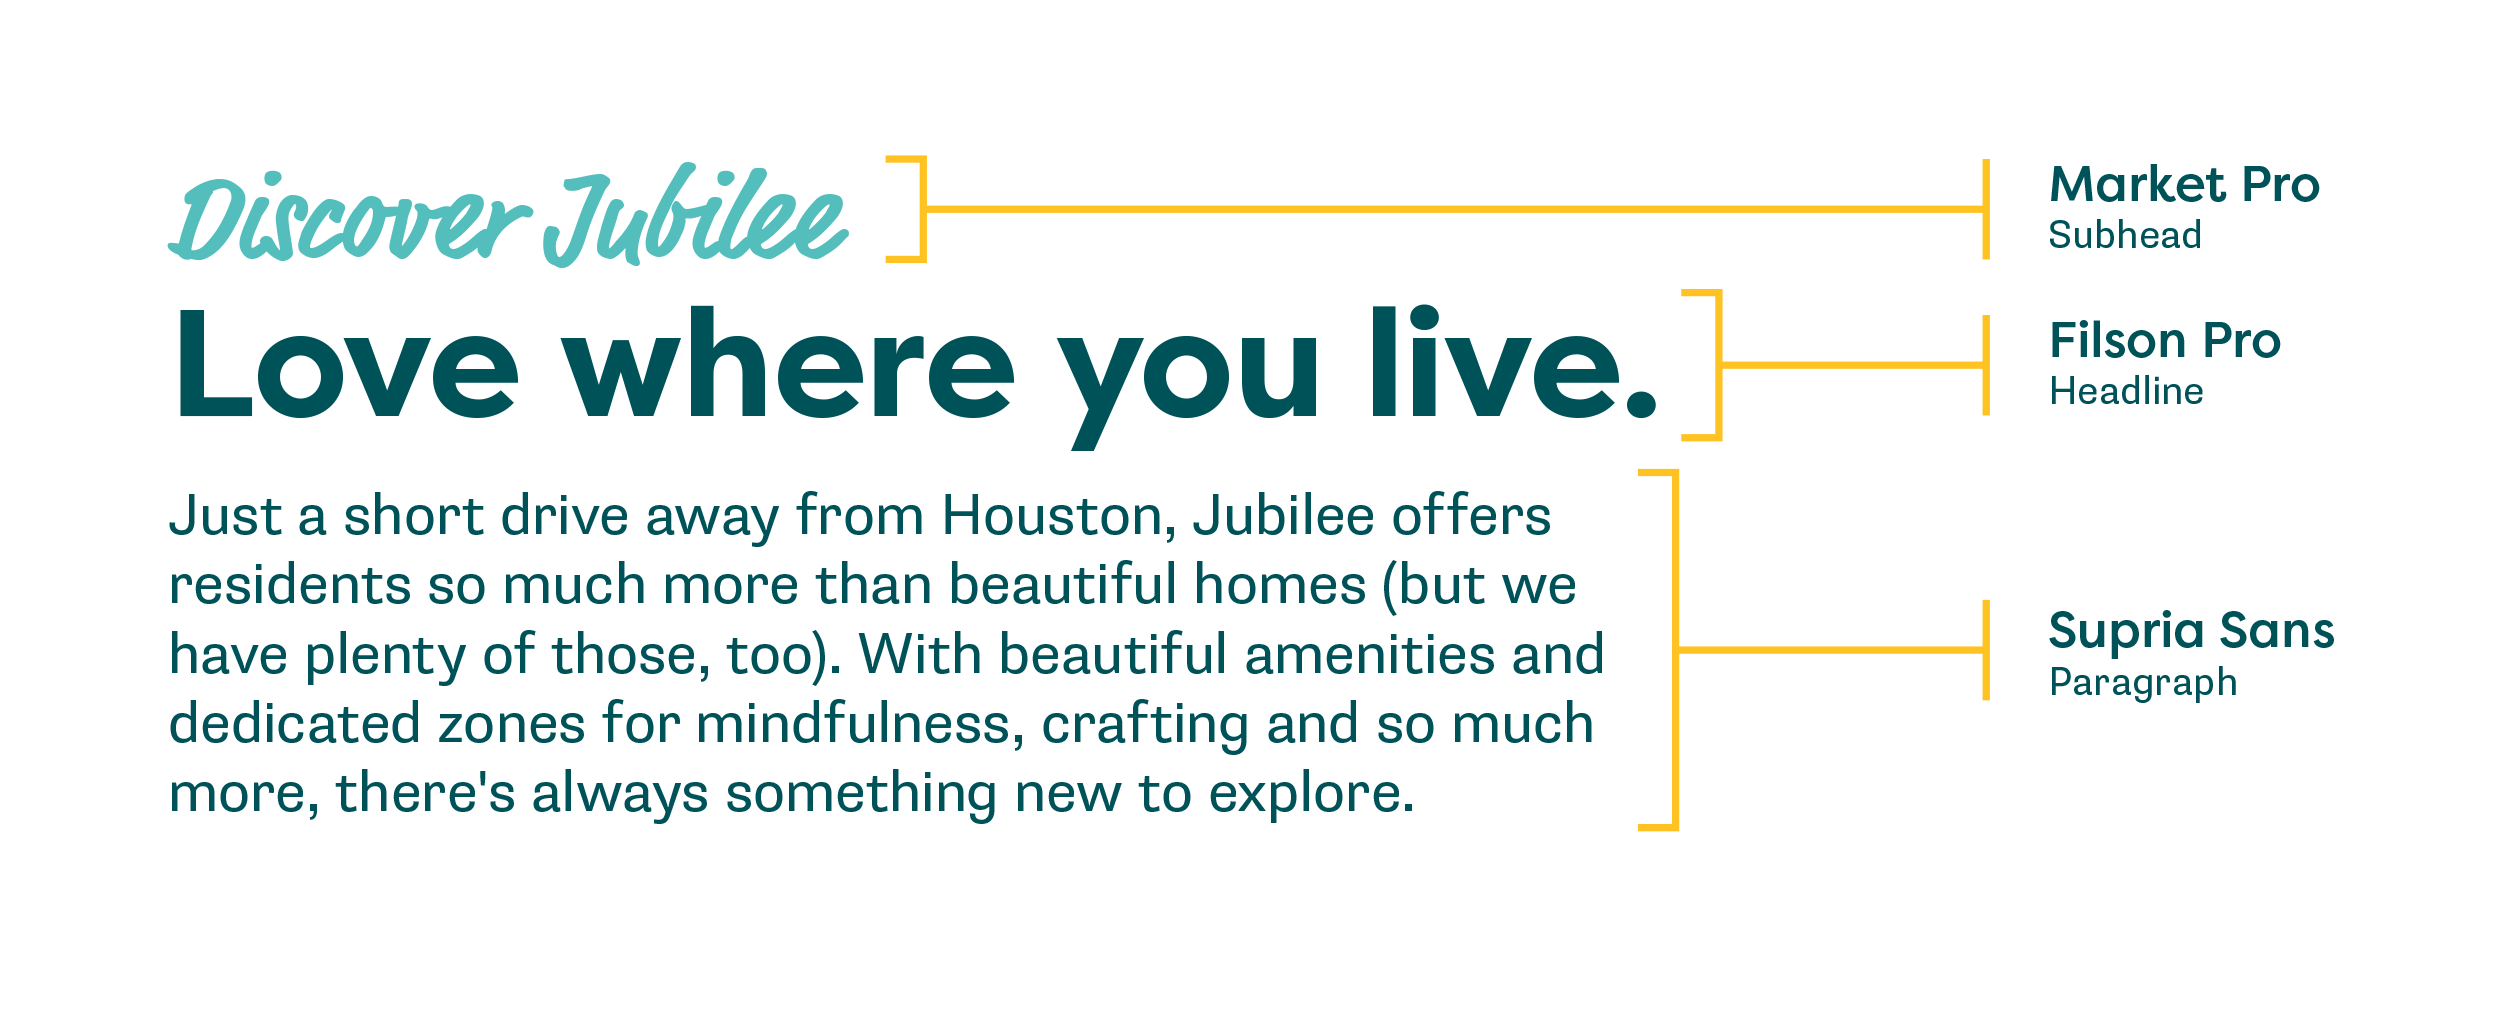 Jubilee brand information showing colors and typography